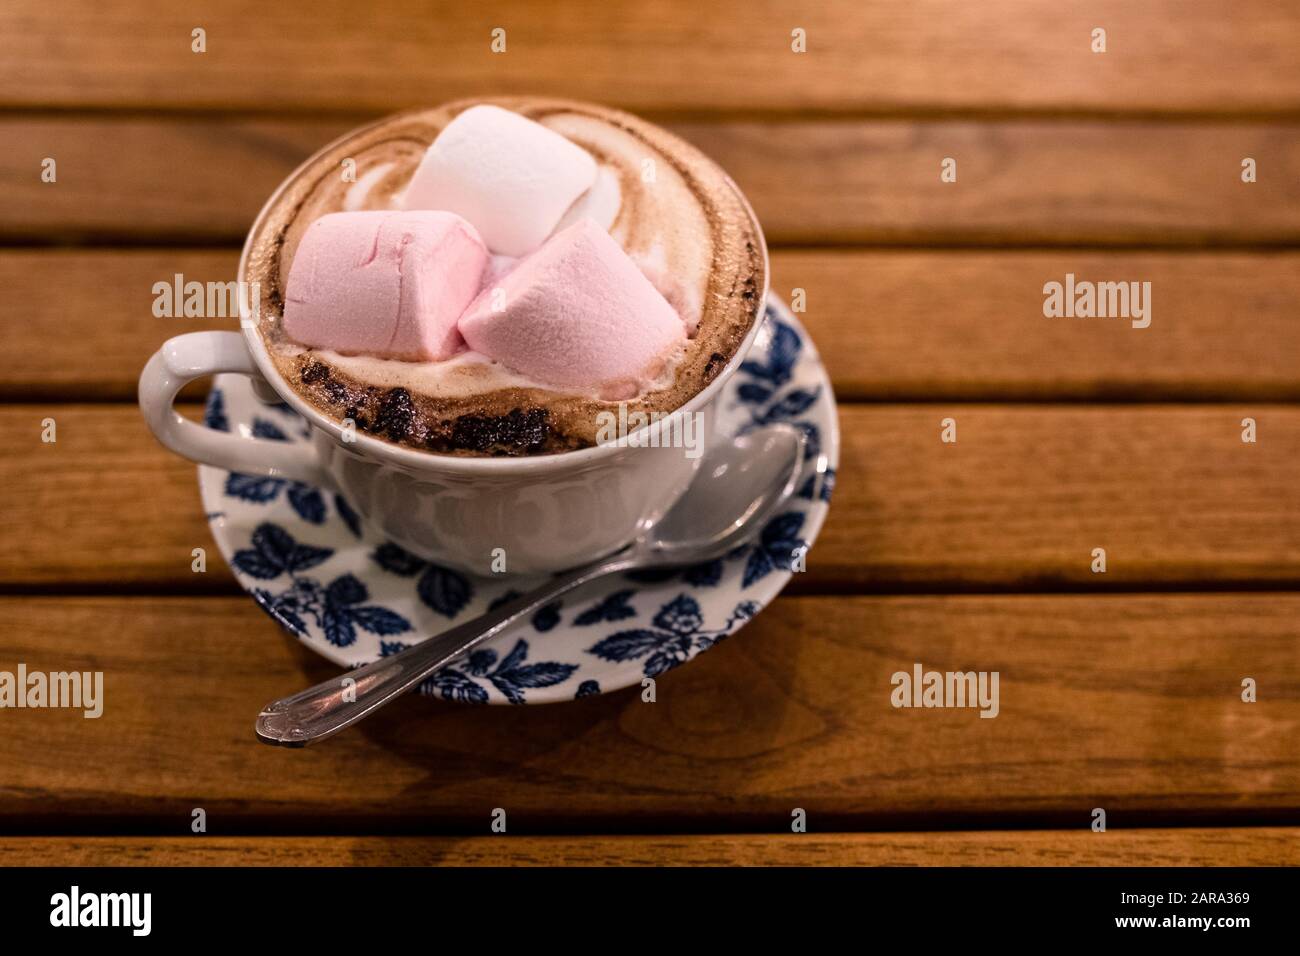 Vintage cup and saucer full of hot chocolate with marsh mellows on top. Stock Photo